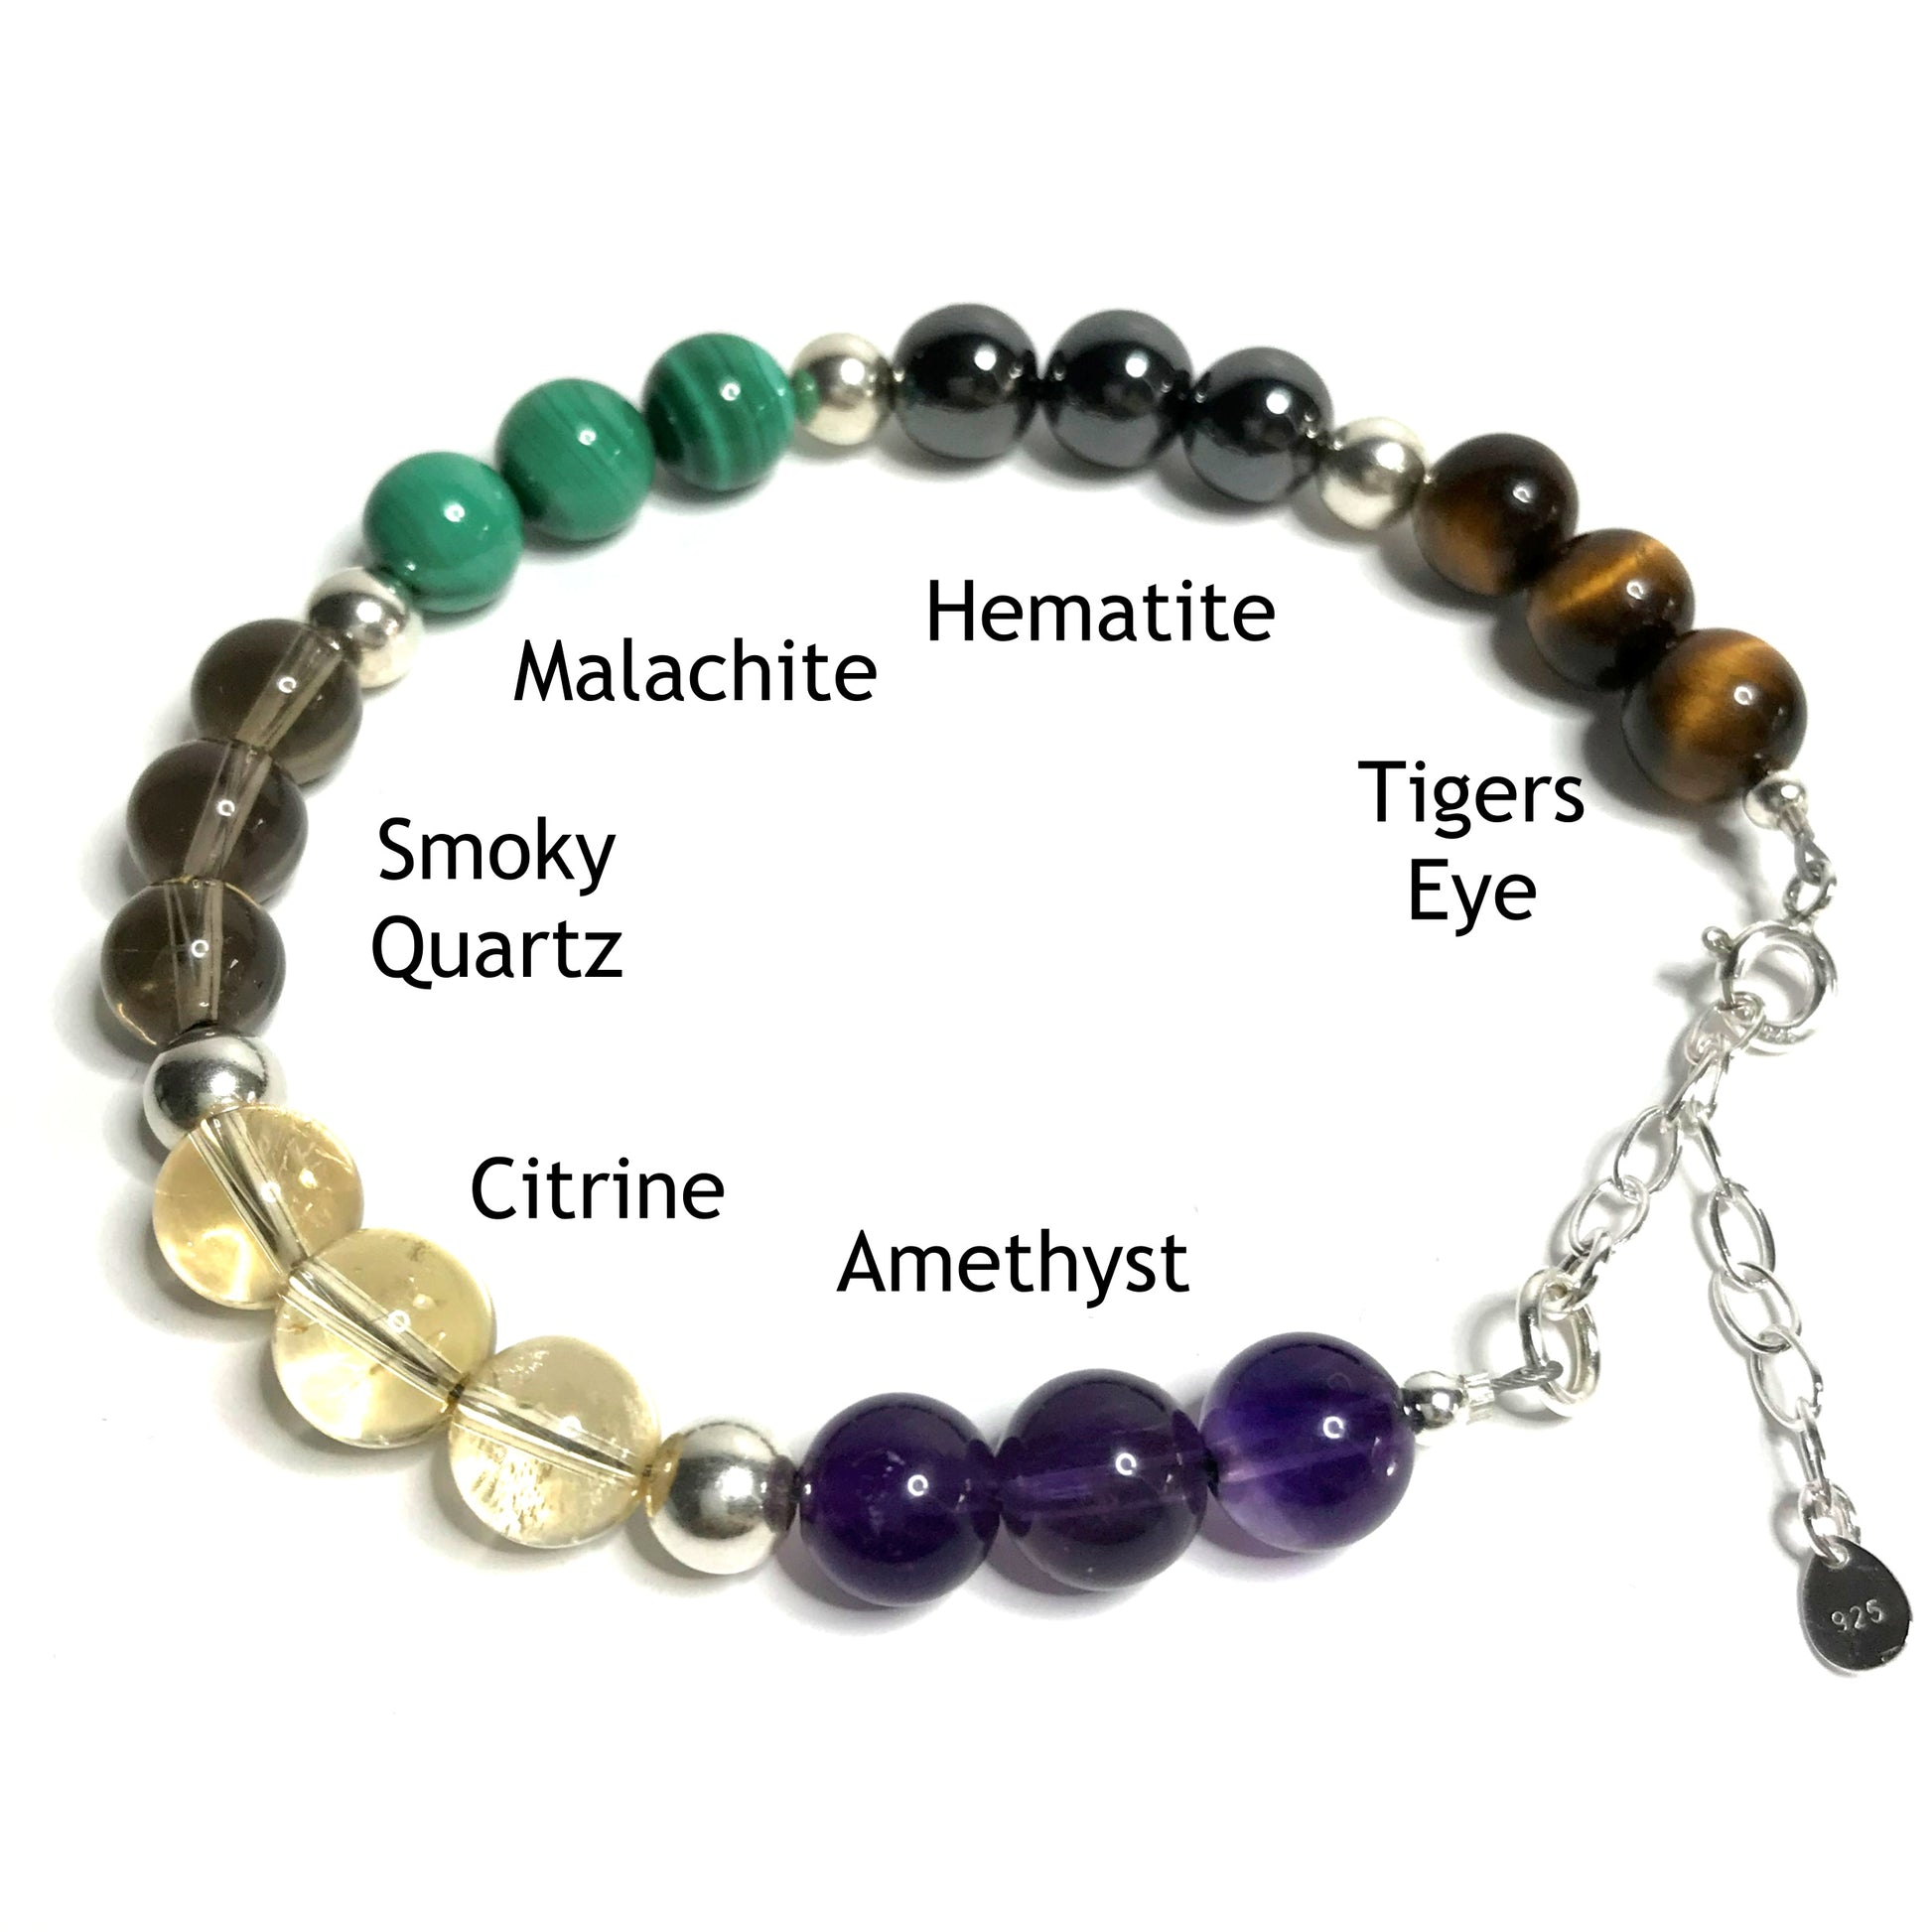 Addiction recovery bracelet with the beads labelled as tiger's eye, hematite, malachite, smoky quartz, citrine and amethyst